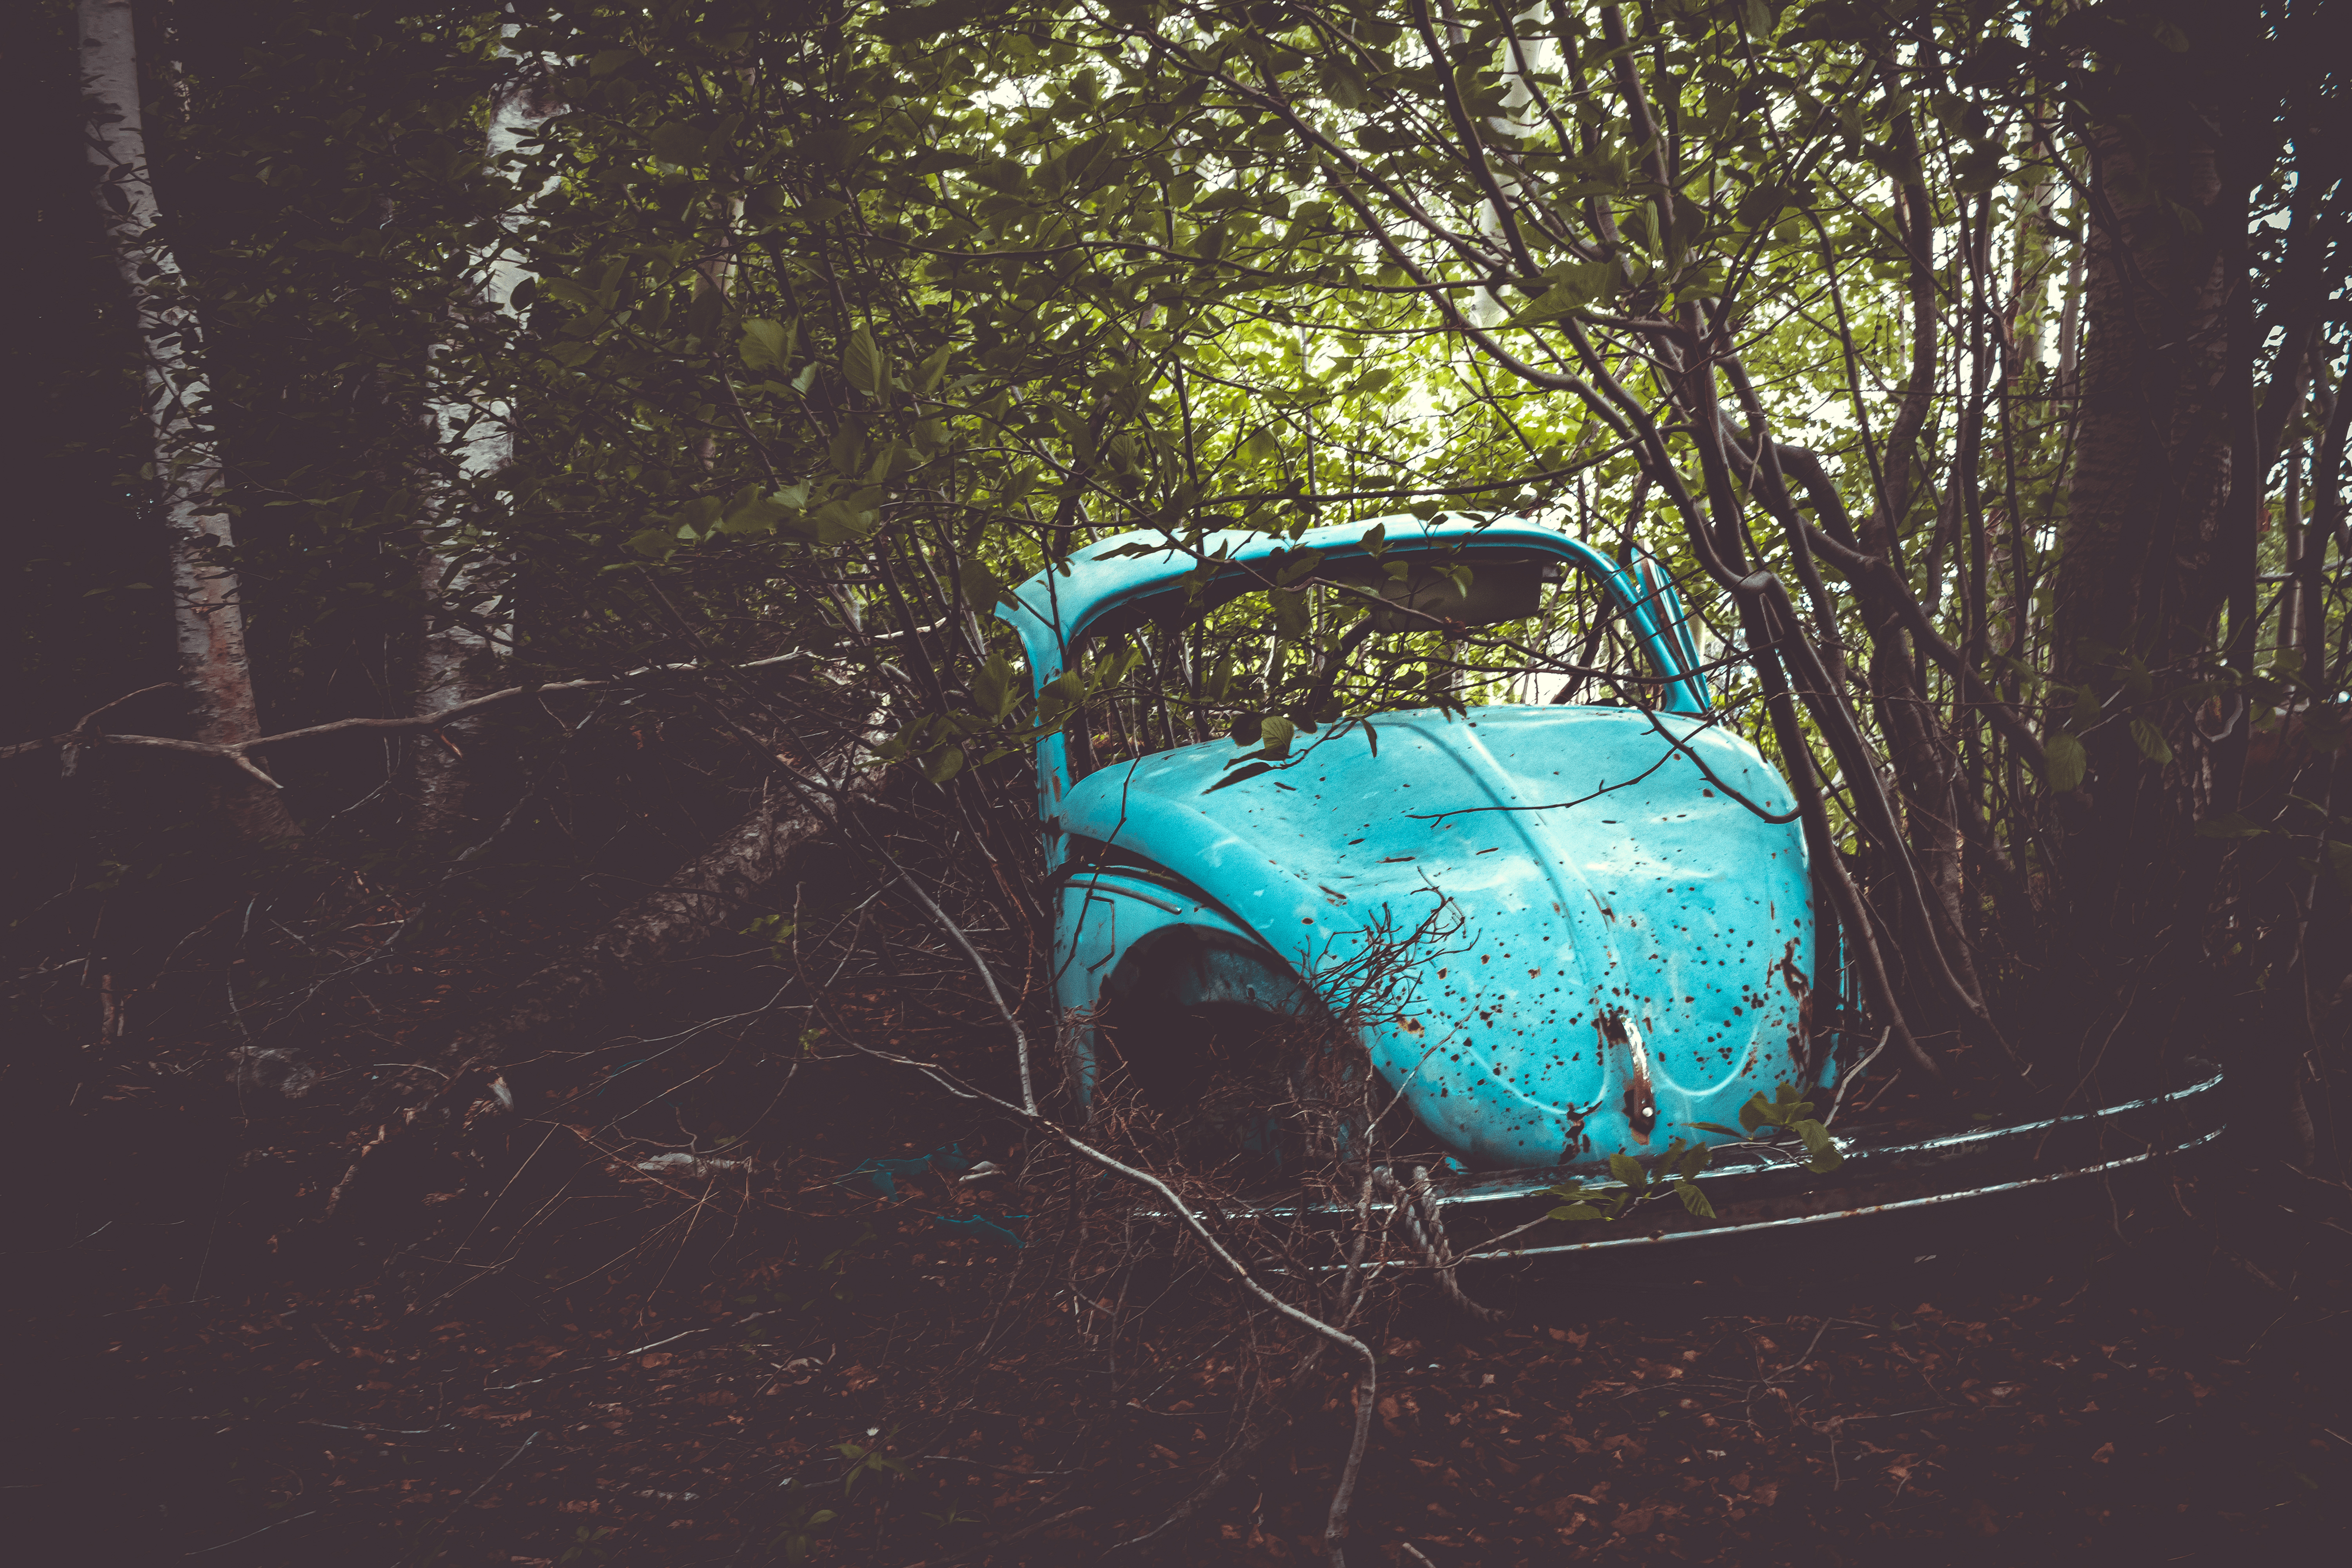 A Bug in the Woods